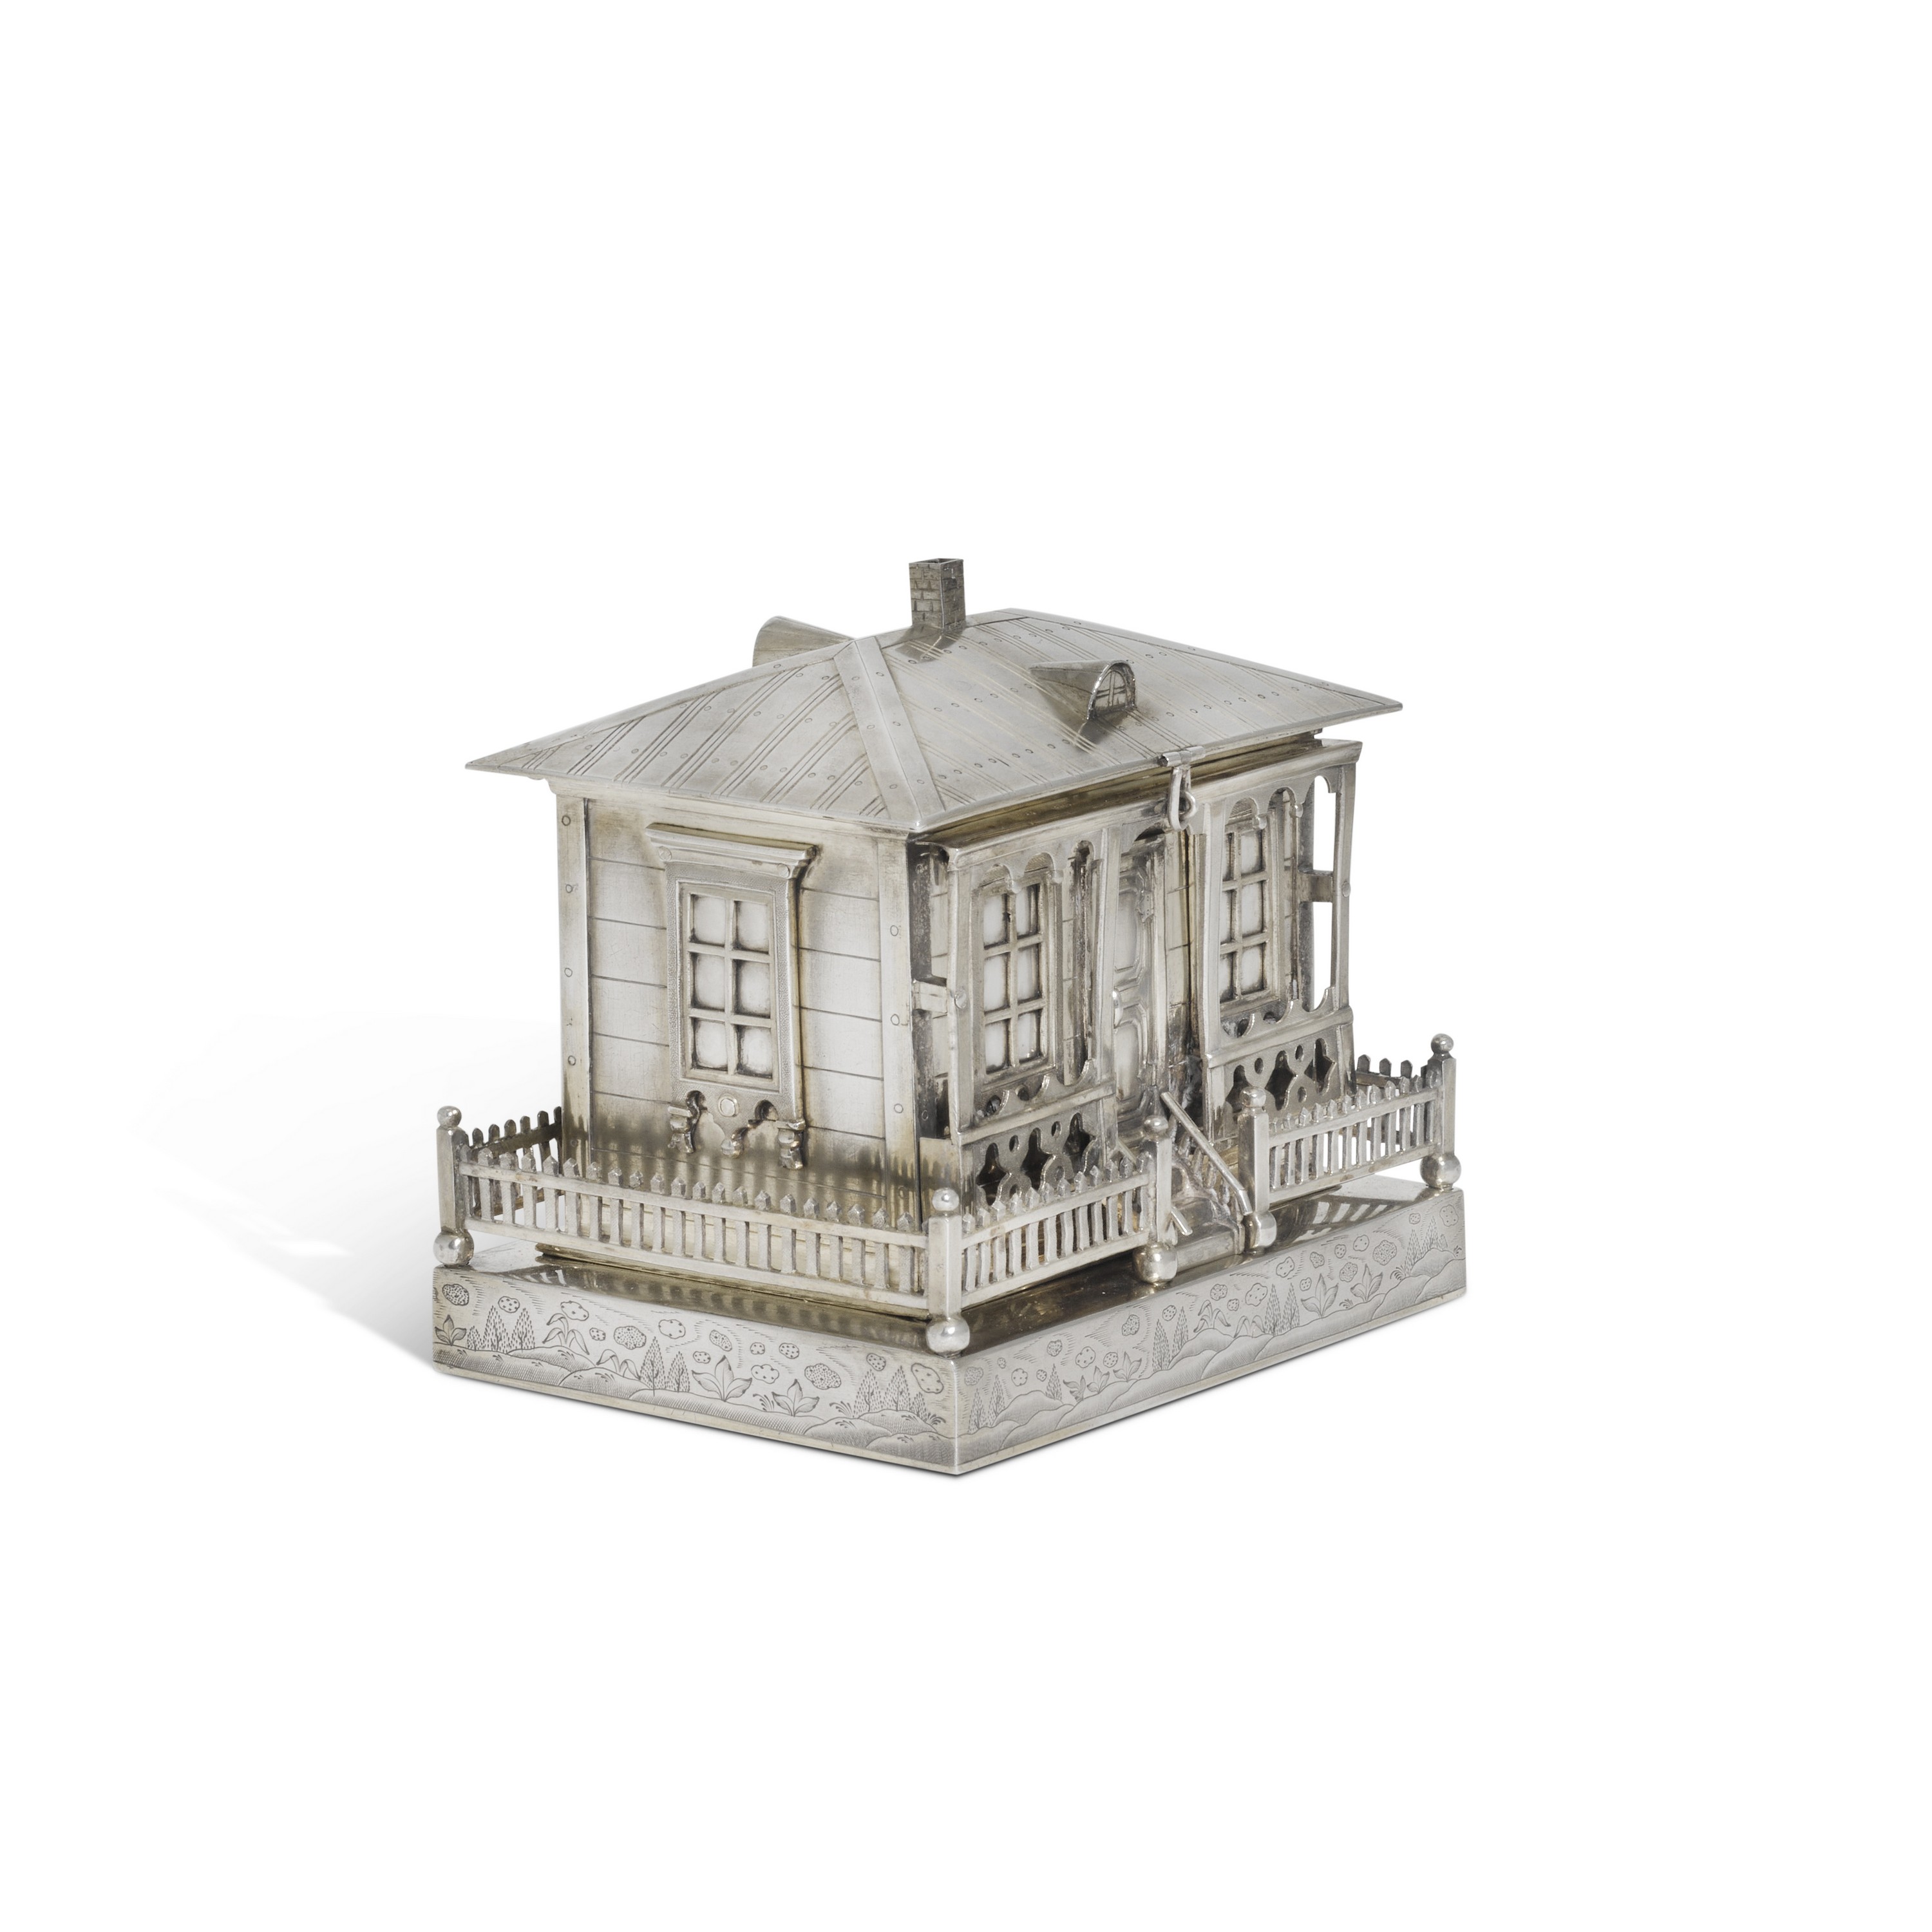 A silver trompe l'oeil box modelled as a house, Andrei Wekman, Moscow, 1869 - Image 2 of 5